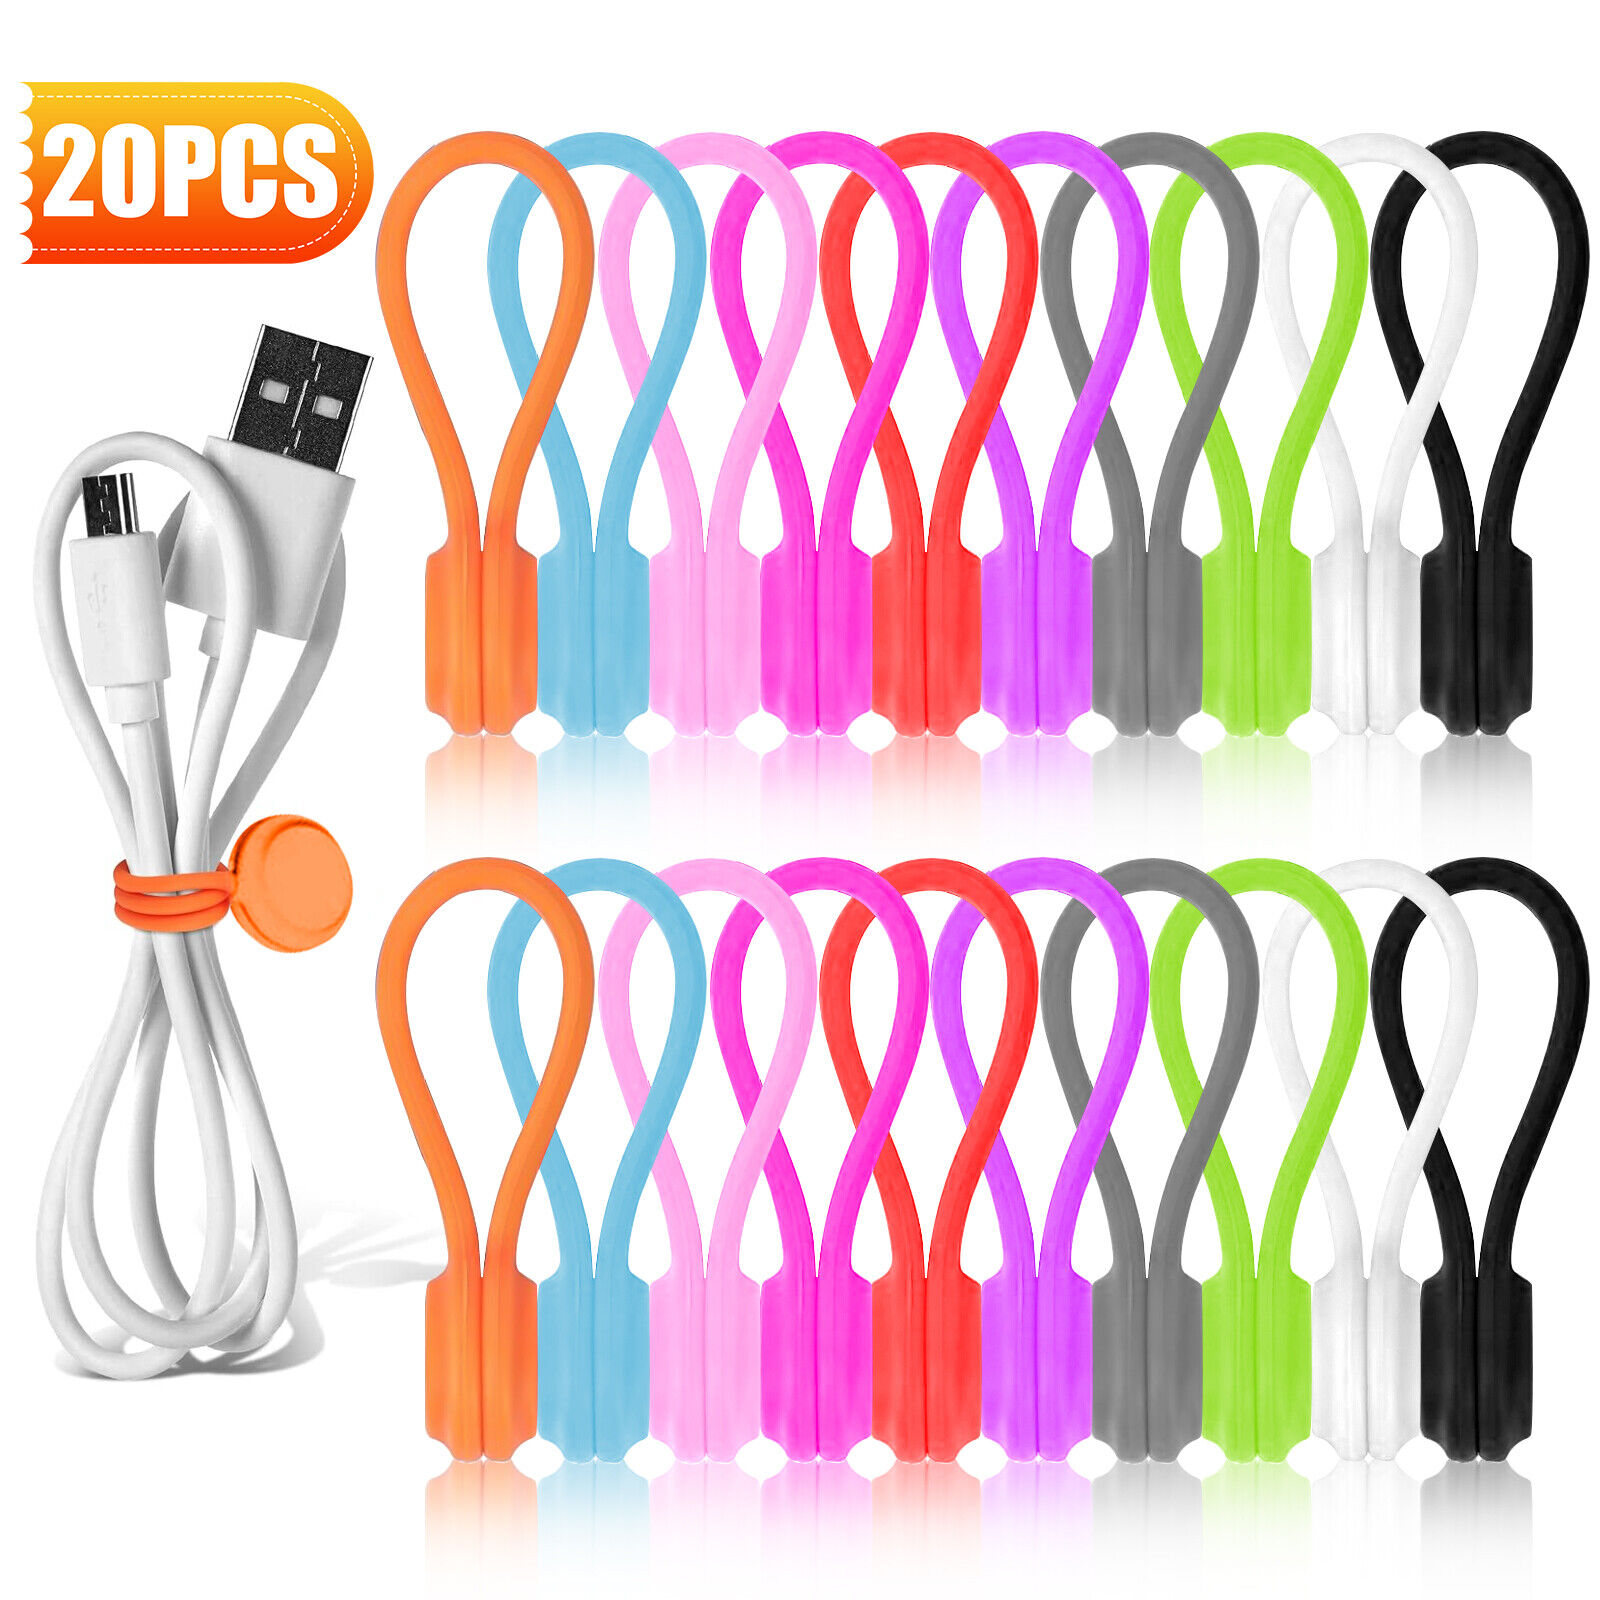 20Pcs Reusable Silicone Magnetic Cable Ties for Bundling Organizing 10 Colors